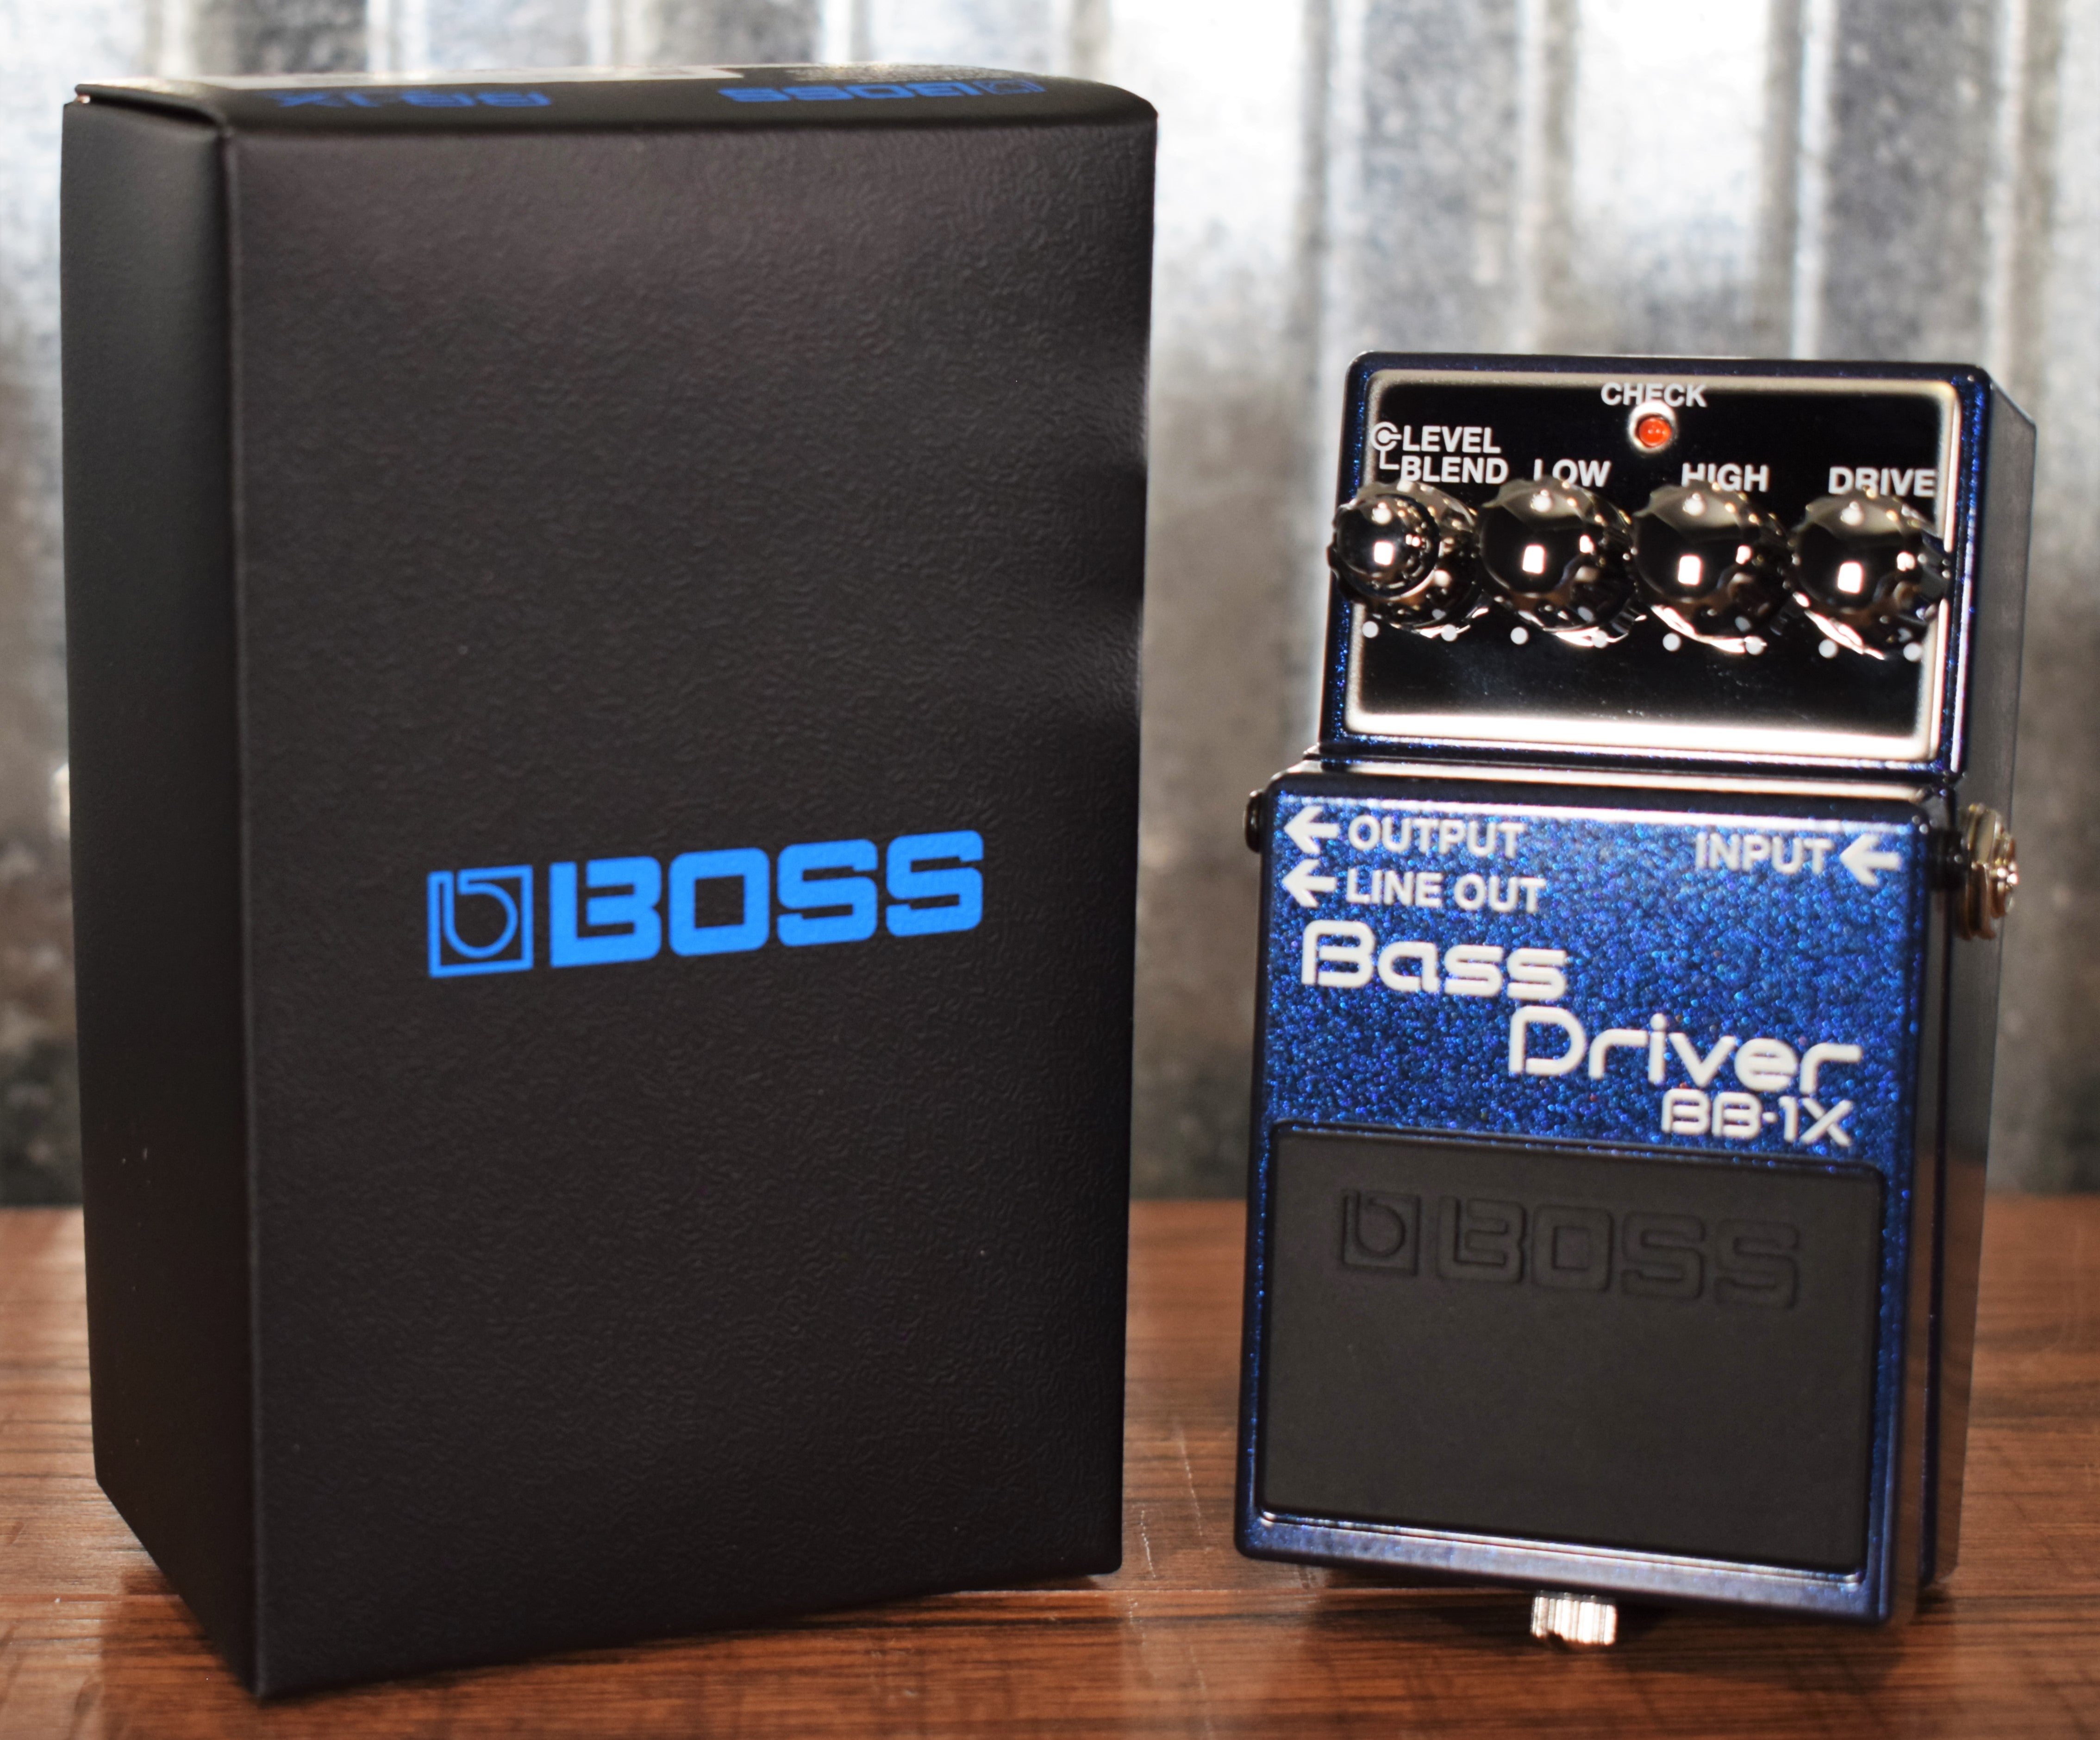 Boss BB-1X Bass Driver Overdrive Effect Pedal – Specialty Traders